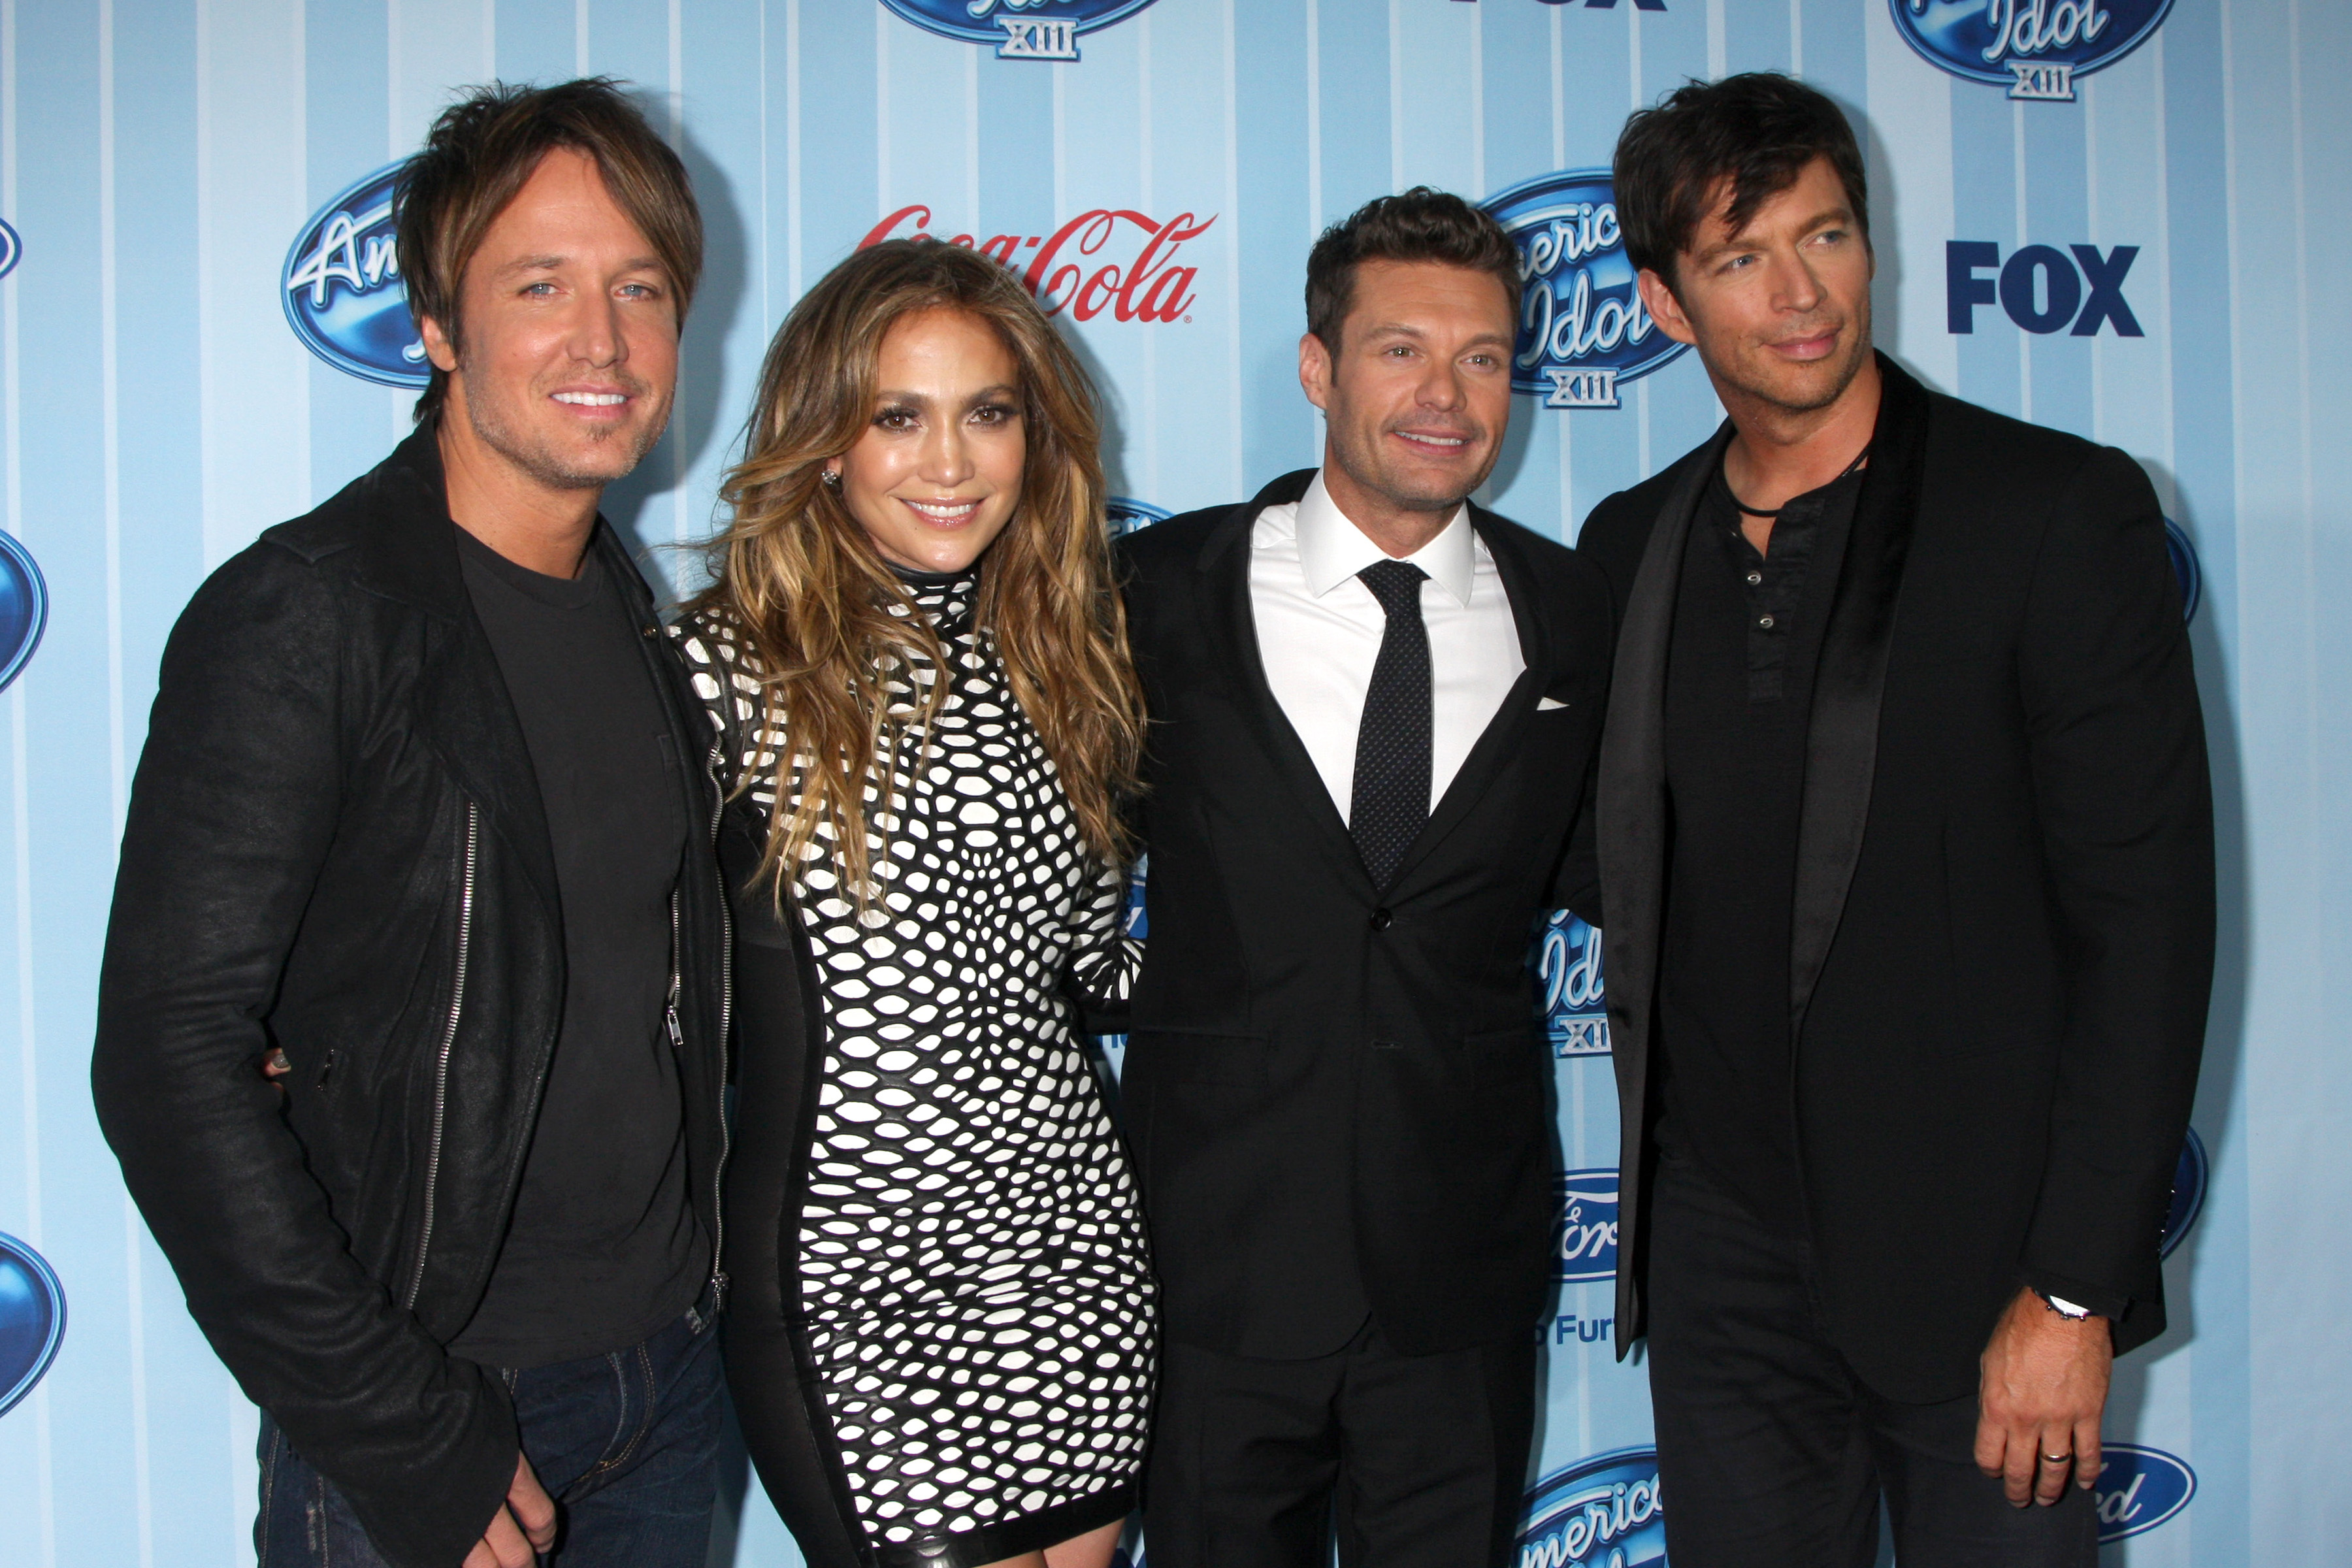 All American Idol Judges Coming Back For Final Season